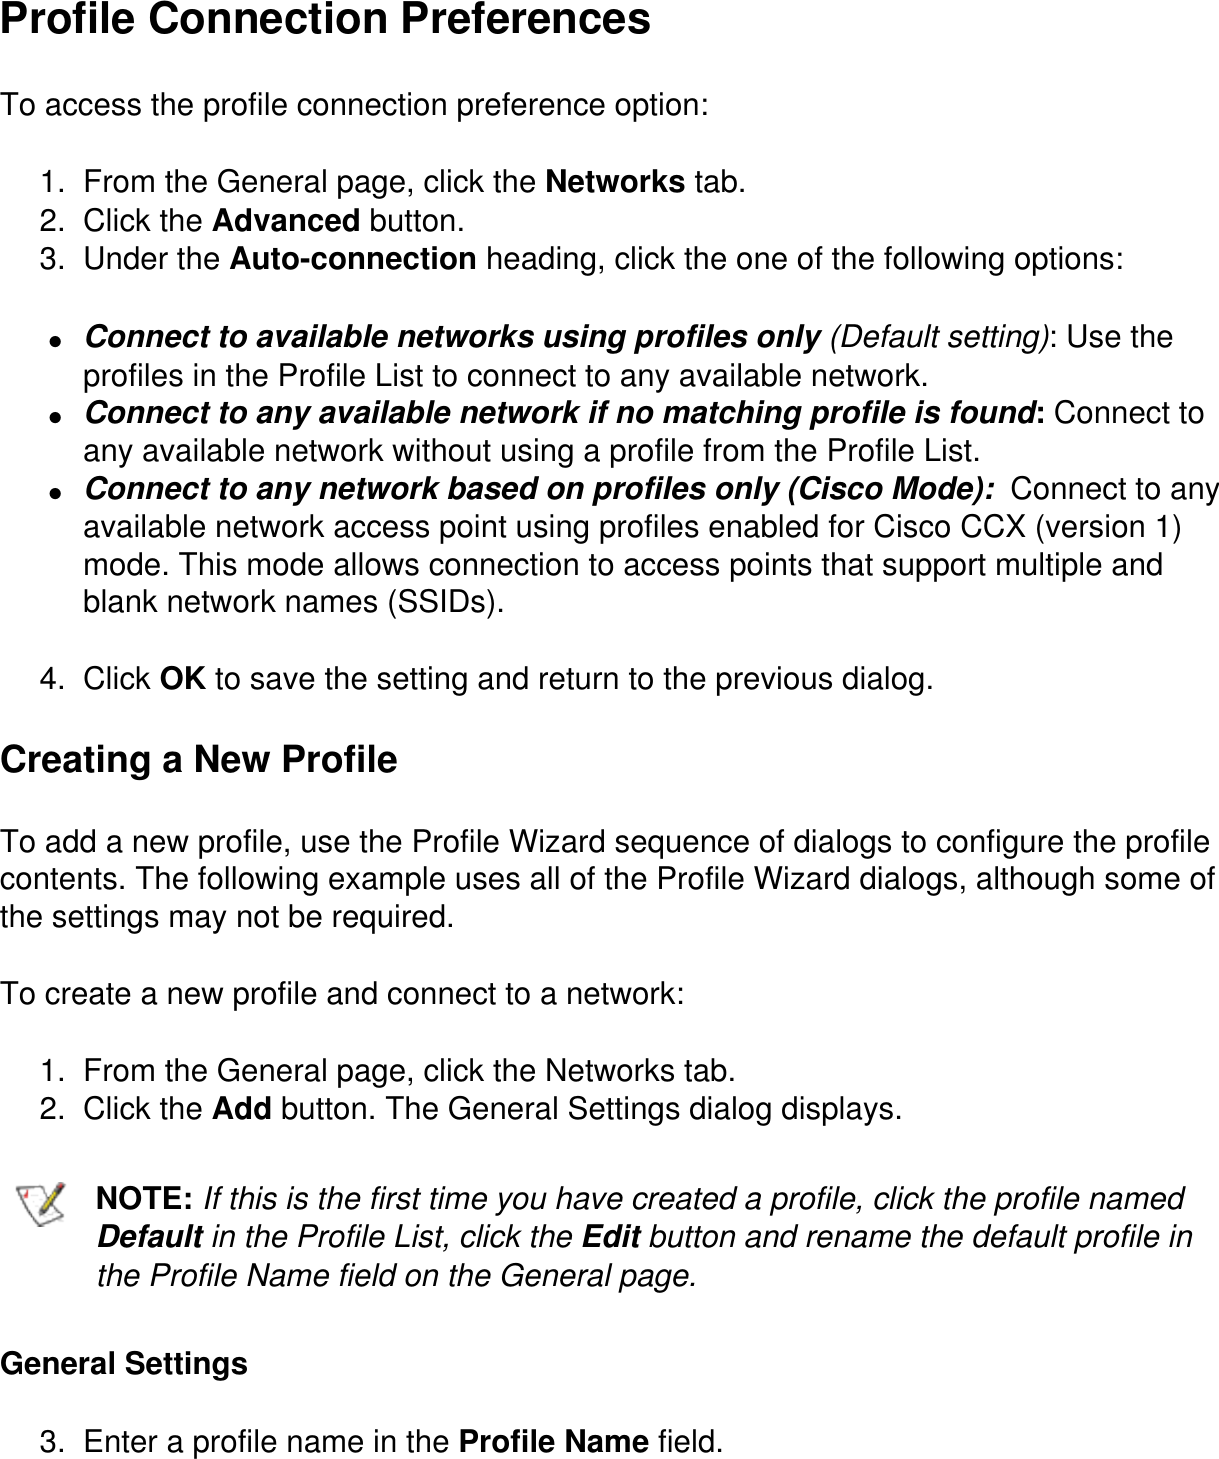 Profile Connection PreferencesTo access the profile connection preference option:1.  From the General page, click the Networks tab.2.  Click the Advanced button.3.  Under the Auto-connection heading, click the one of the following options:●     Connect to available networks using profiles only (Default setting): Use the profiles in the Profile List to connect to any available network.●     Connect to any available network if no matching profile is found: Connect to any available network without using a profile from the Profile List.●     Connect to any network based on profiles only (Cisco Mode):  Connect to any available network access point using profiles enabled for Cisco CCX (version 1) mode. This mode allows connection to access points that support multiple and blank network names (SSIDs).4.  Click OK to save the setting and return to the previous dialog.Creating a New ProfileTo add a new profile, use the Profile Wizard sequence of dialogs to configure the profile contents. The following example uses all of the Profile Wizard dialogs, although some of the settings may not be required.To create a new profile and connect to a network:1.  From the General page, click the Networks tab.2.  Click the Add button. The General Settings dialog displays.NOTE: If this is the first time you have created a profile, click the profile named Default in the Profile List, click the Edit button and rename the default profile in the Profile Name field on the General page.General Settings3.  Enter a profile name in the Profile Name field.